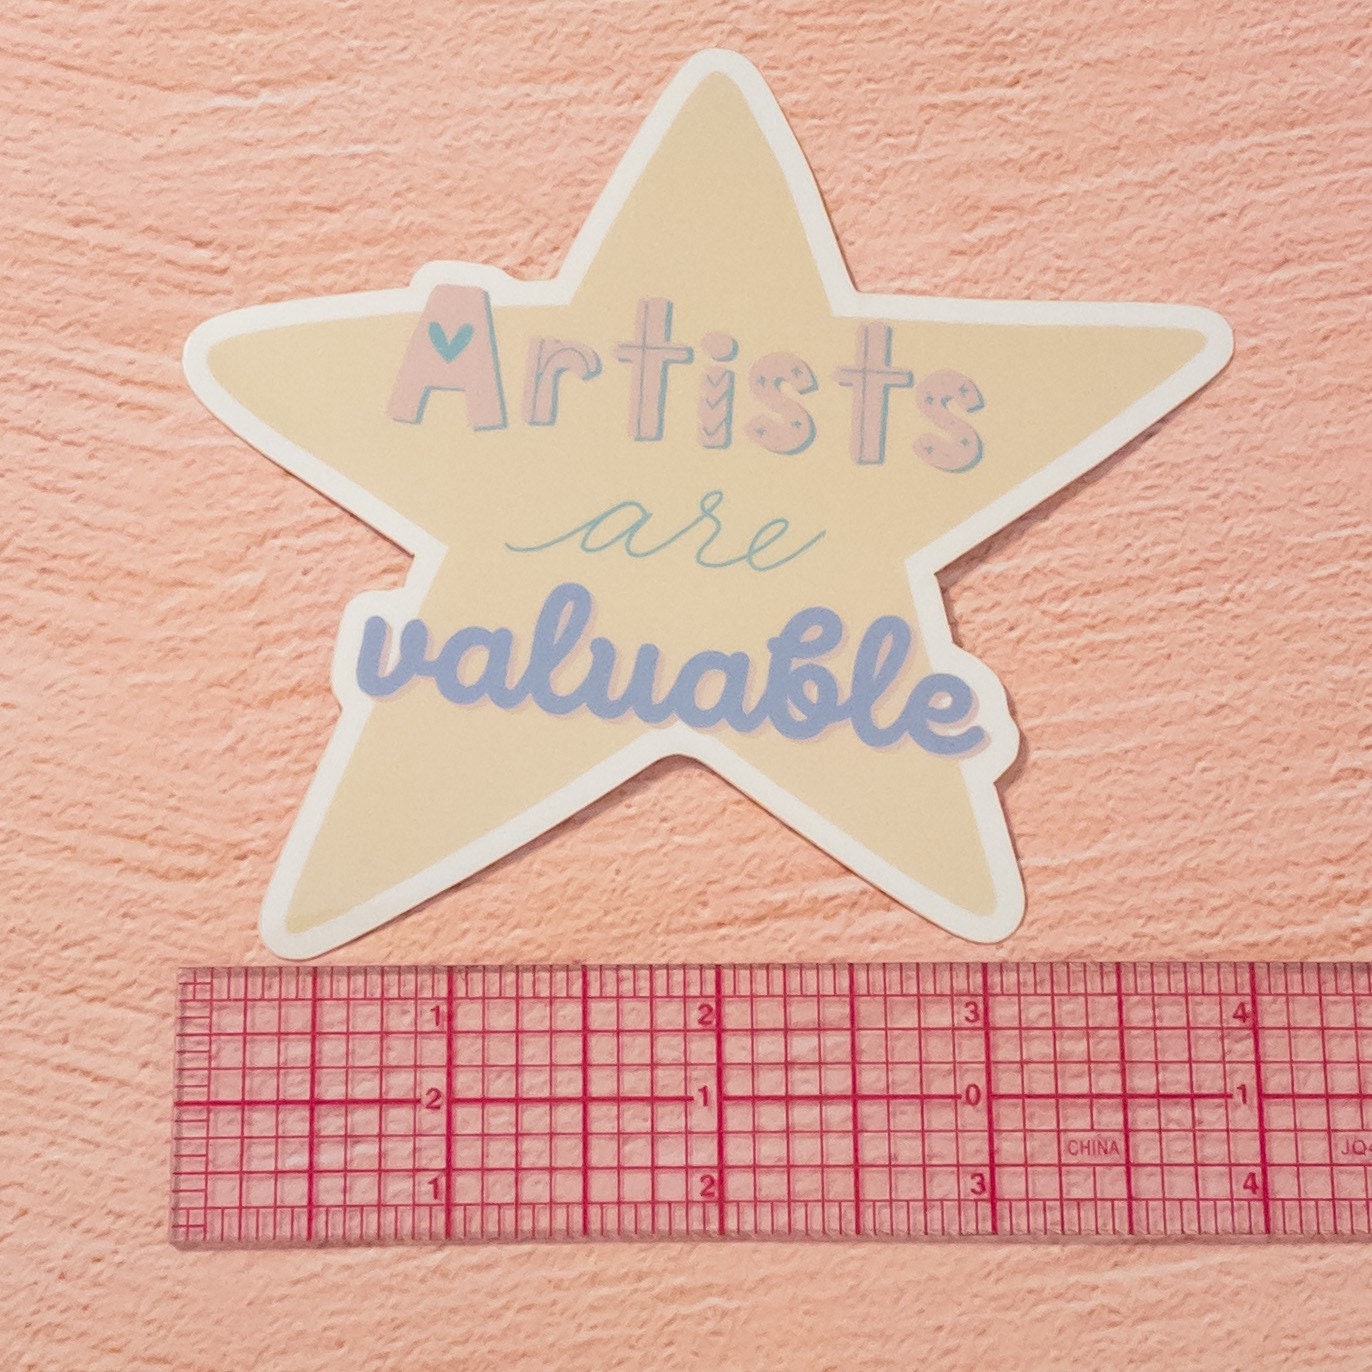 Artists Are Valuable Vinyl Sticker 4 inch